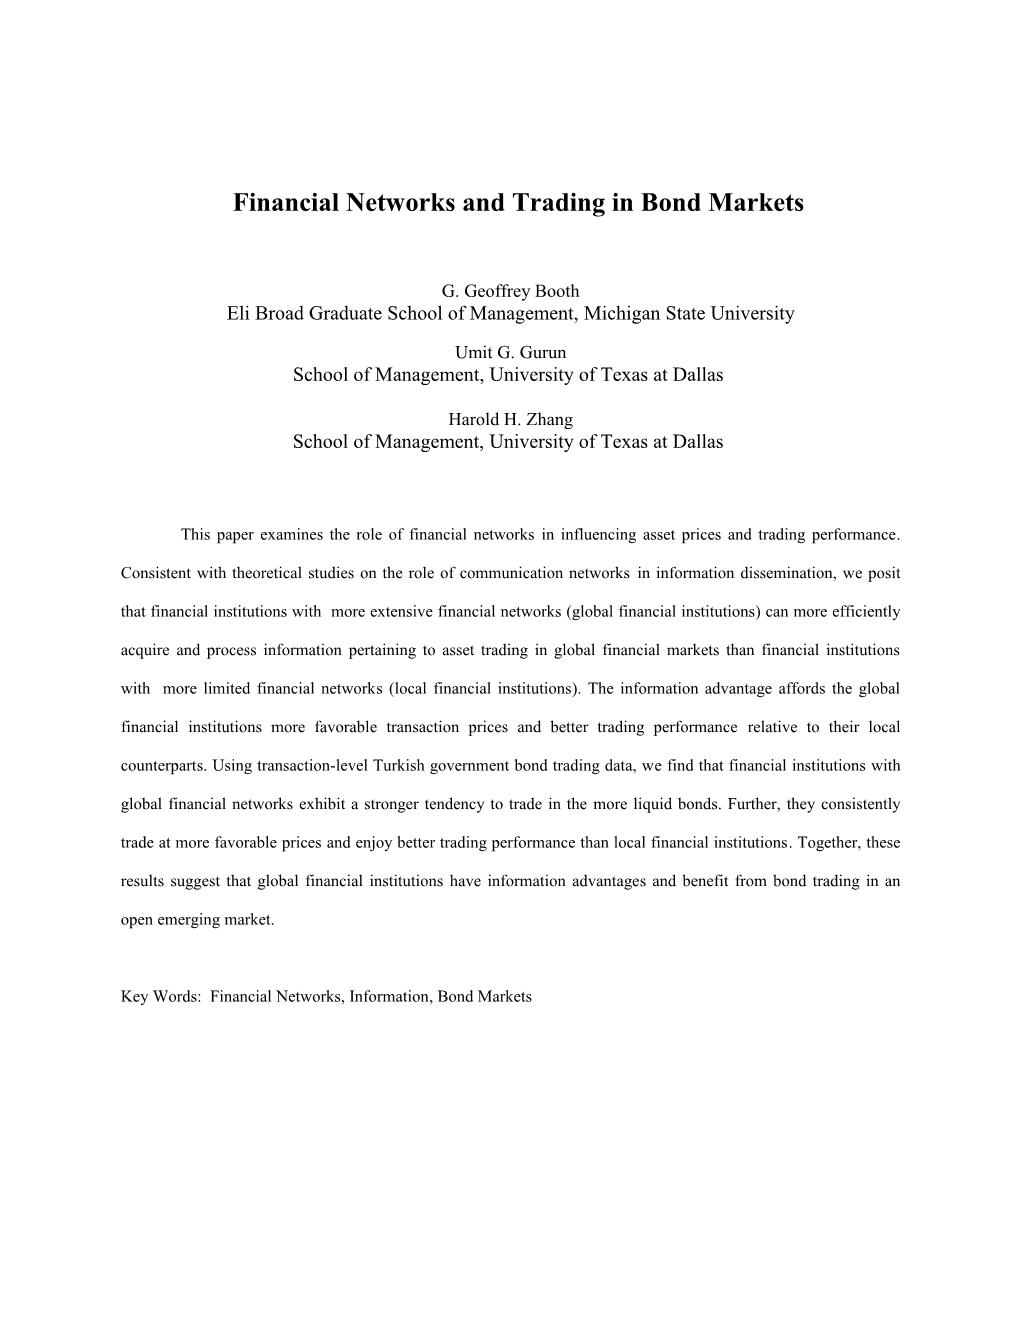 Global Financial Networks and Trading in Emerging Bond Markets